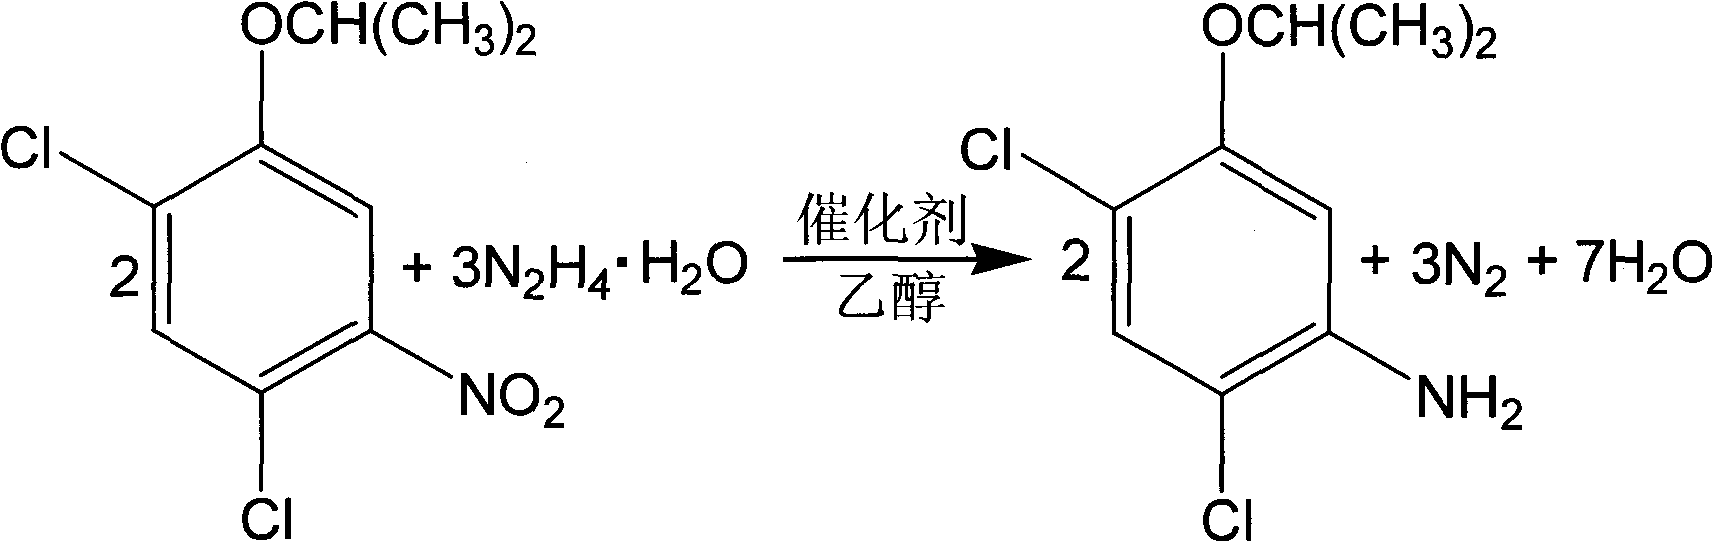 Synthesis method of 2,4-dichloro-5-isopropoxy aniline